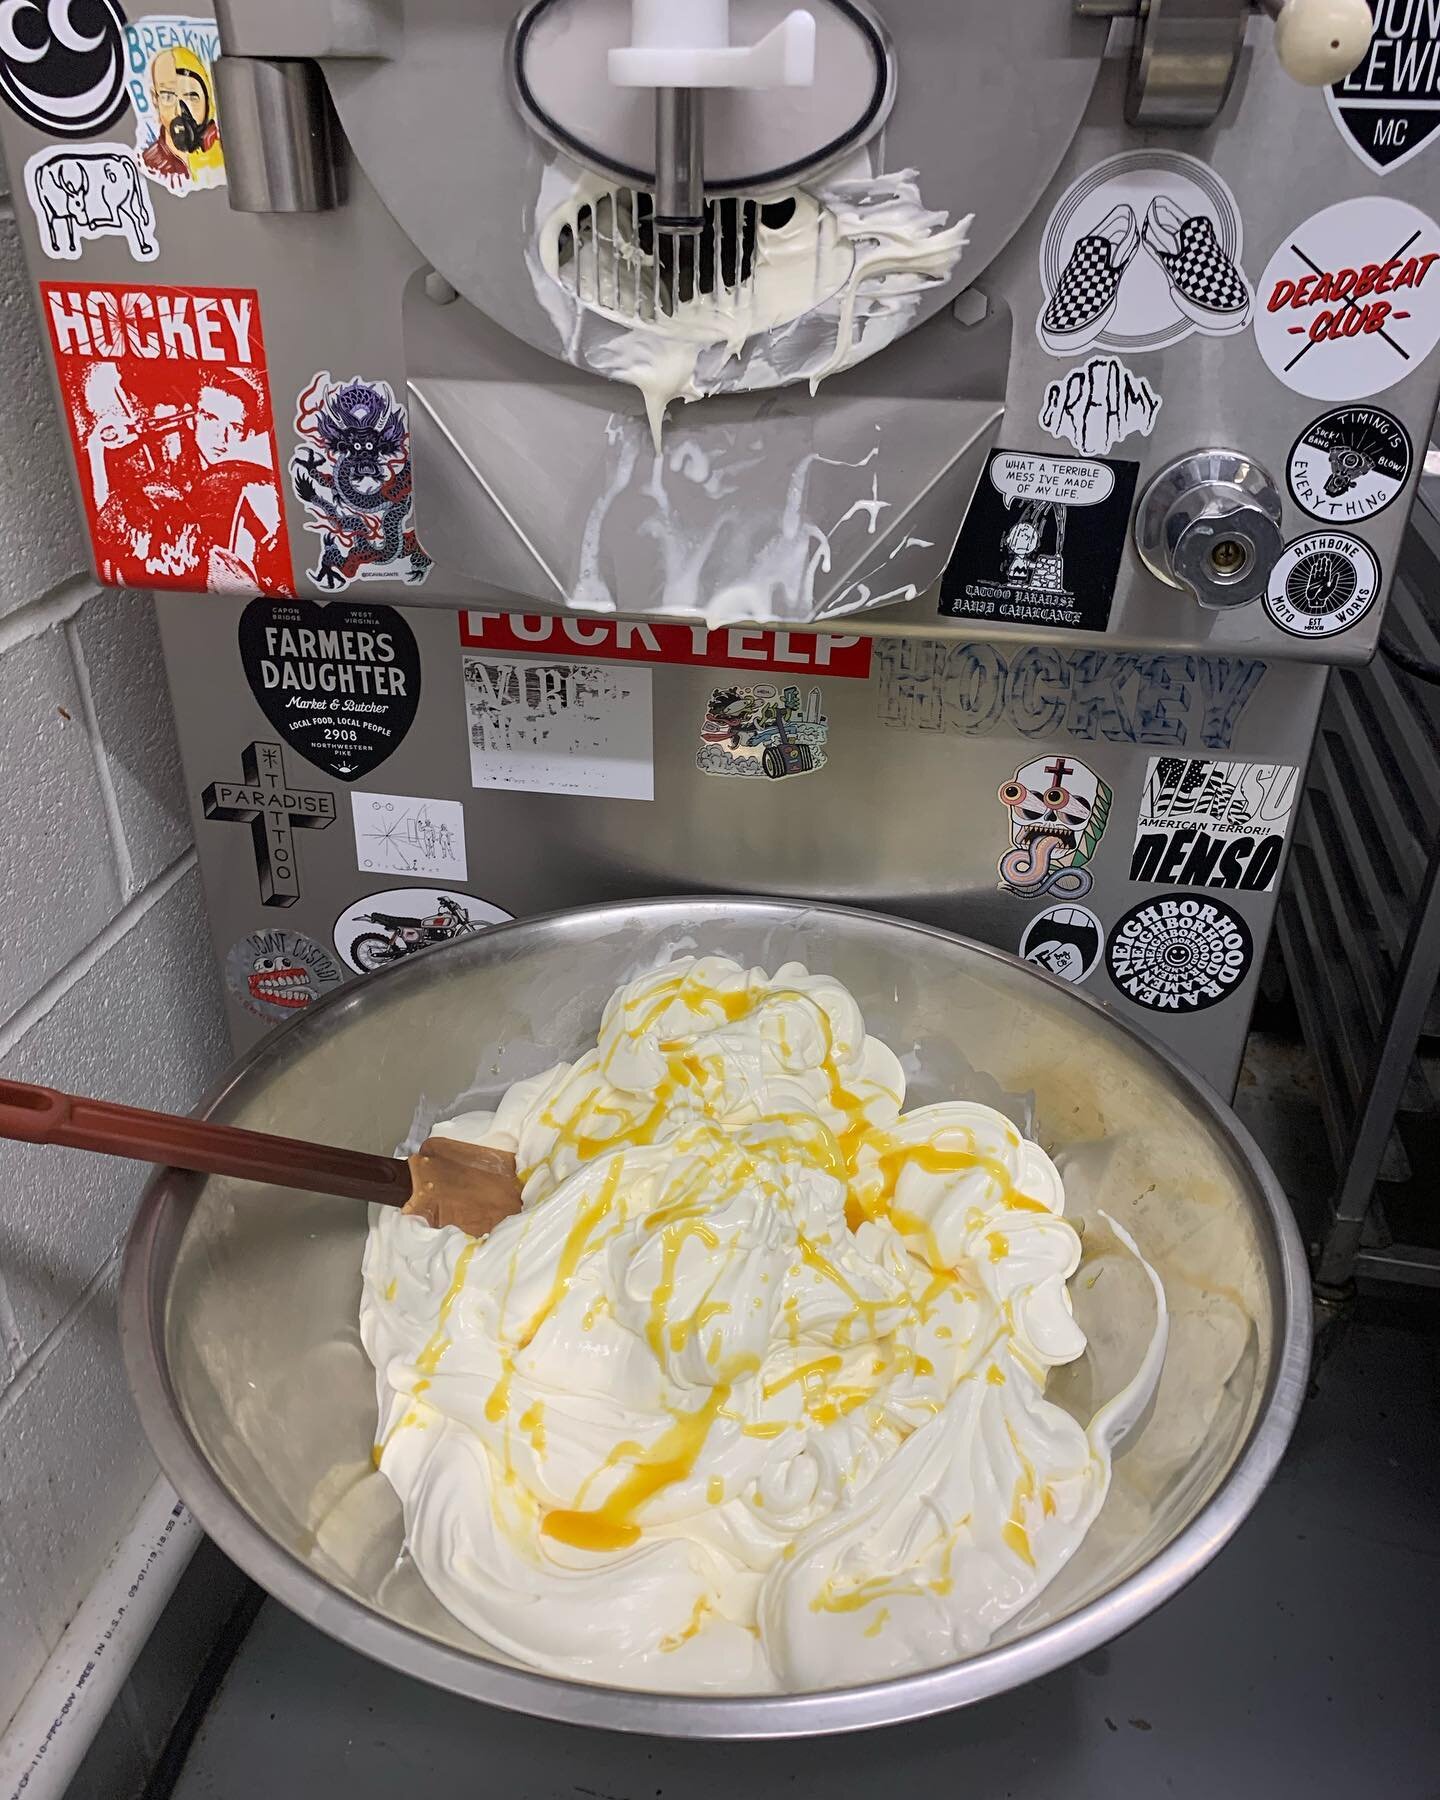 Jeju Island Creamsicle- a sweet Korean mandarin preserves (cousin of the Dekopon) swirled into a creamsicle Philly style ice cream base
Available @anjufrc on the patio or whatever kids do these days, be safe